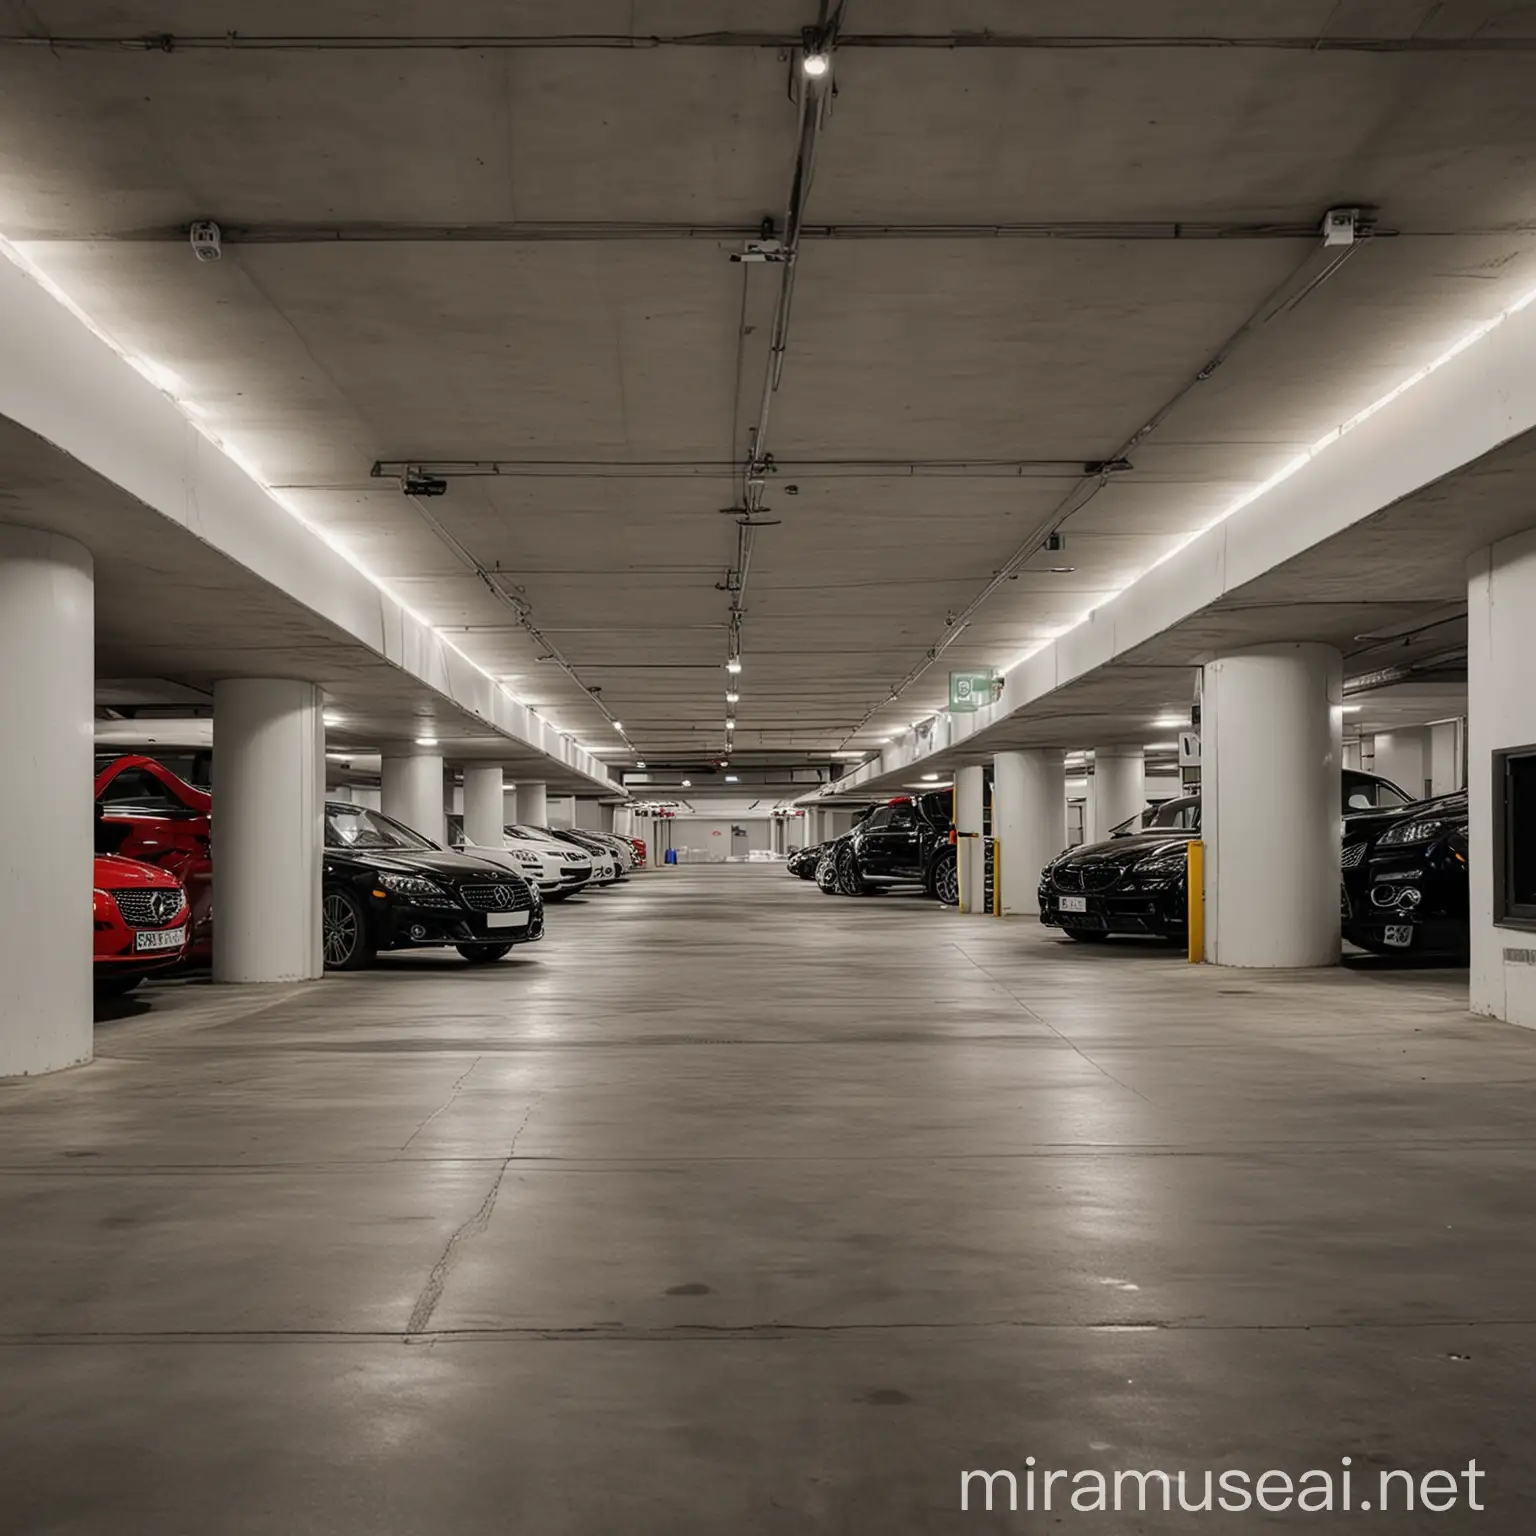 Luxury Cars in a Nice and Elegant Closed Parking Garage